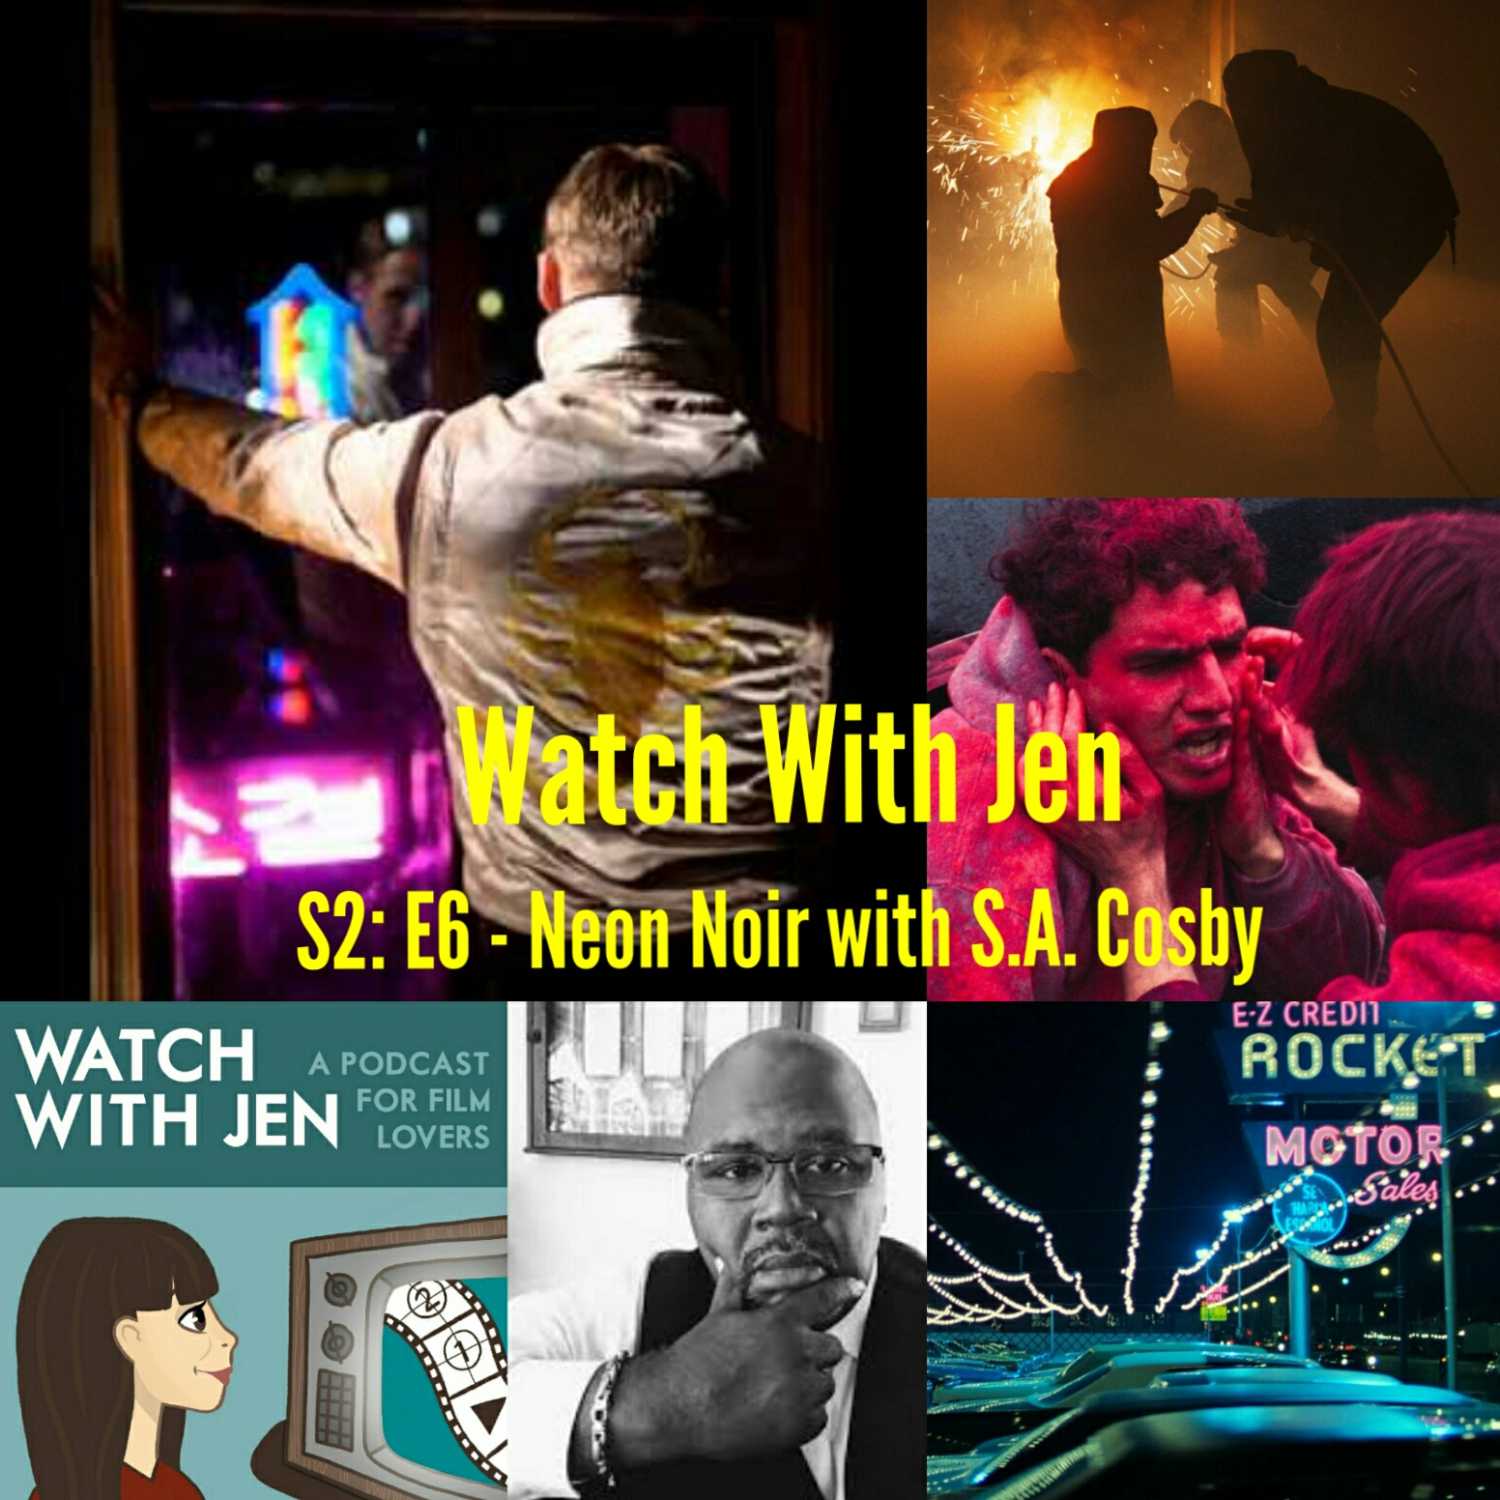 Watch With Jen - S2: E6 - Neon Noir with S.A. Cosby